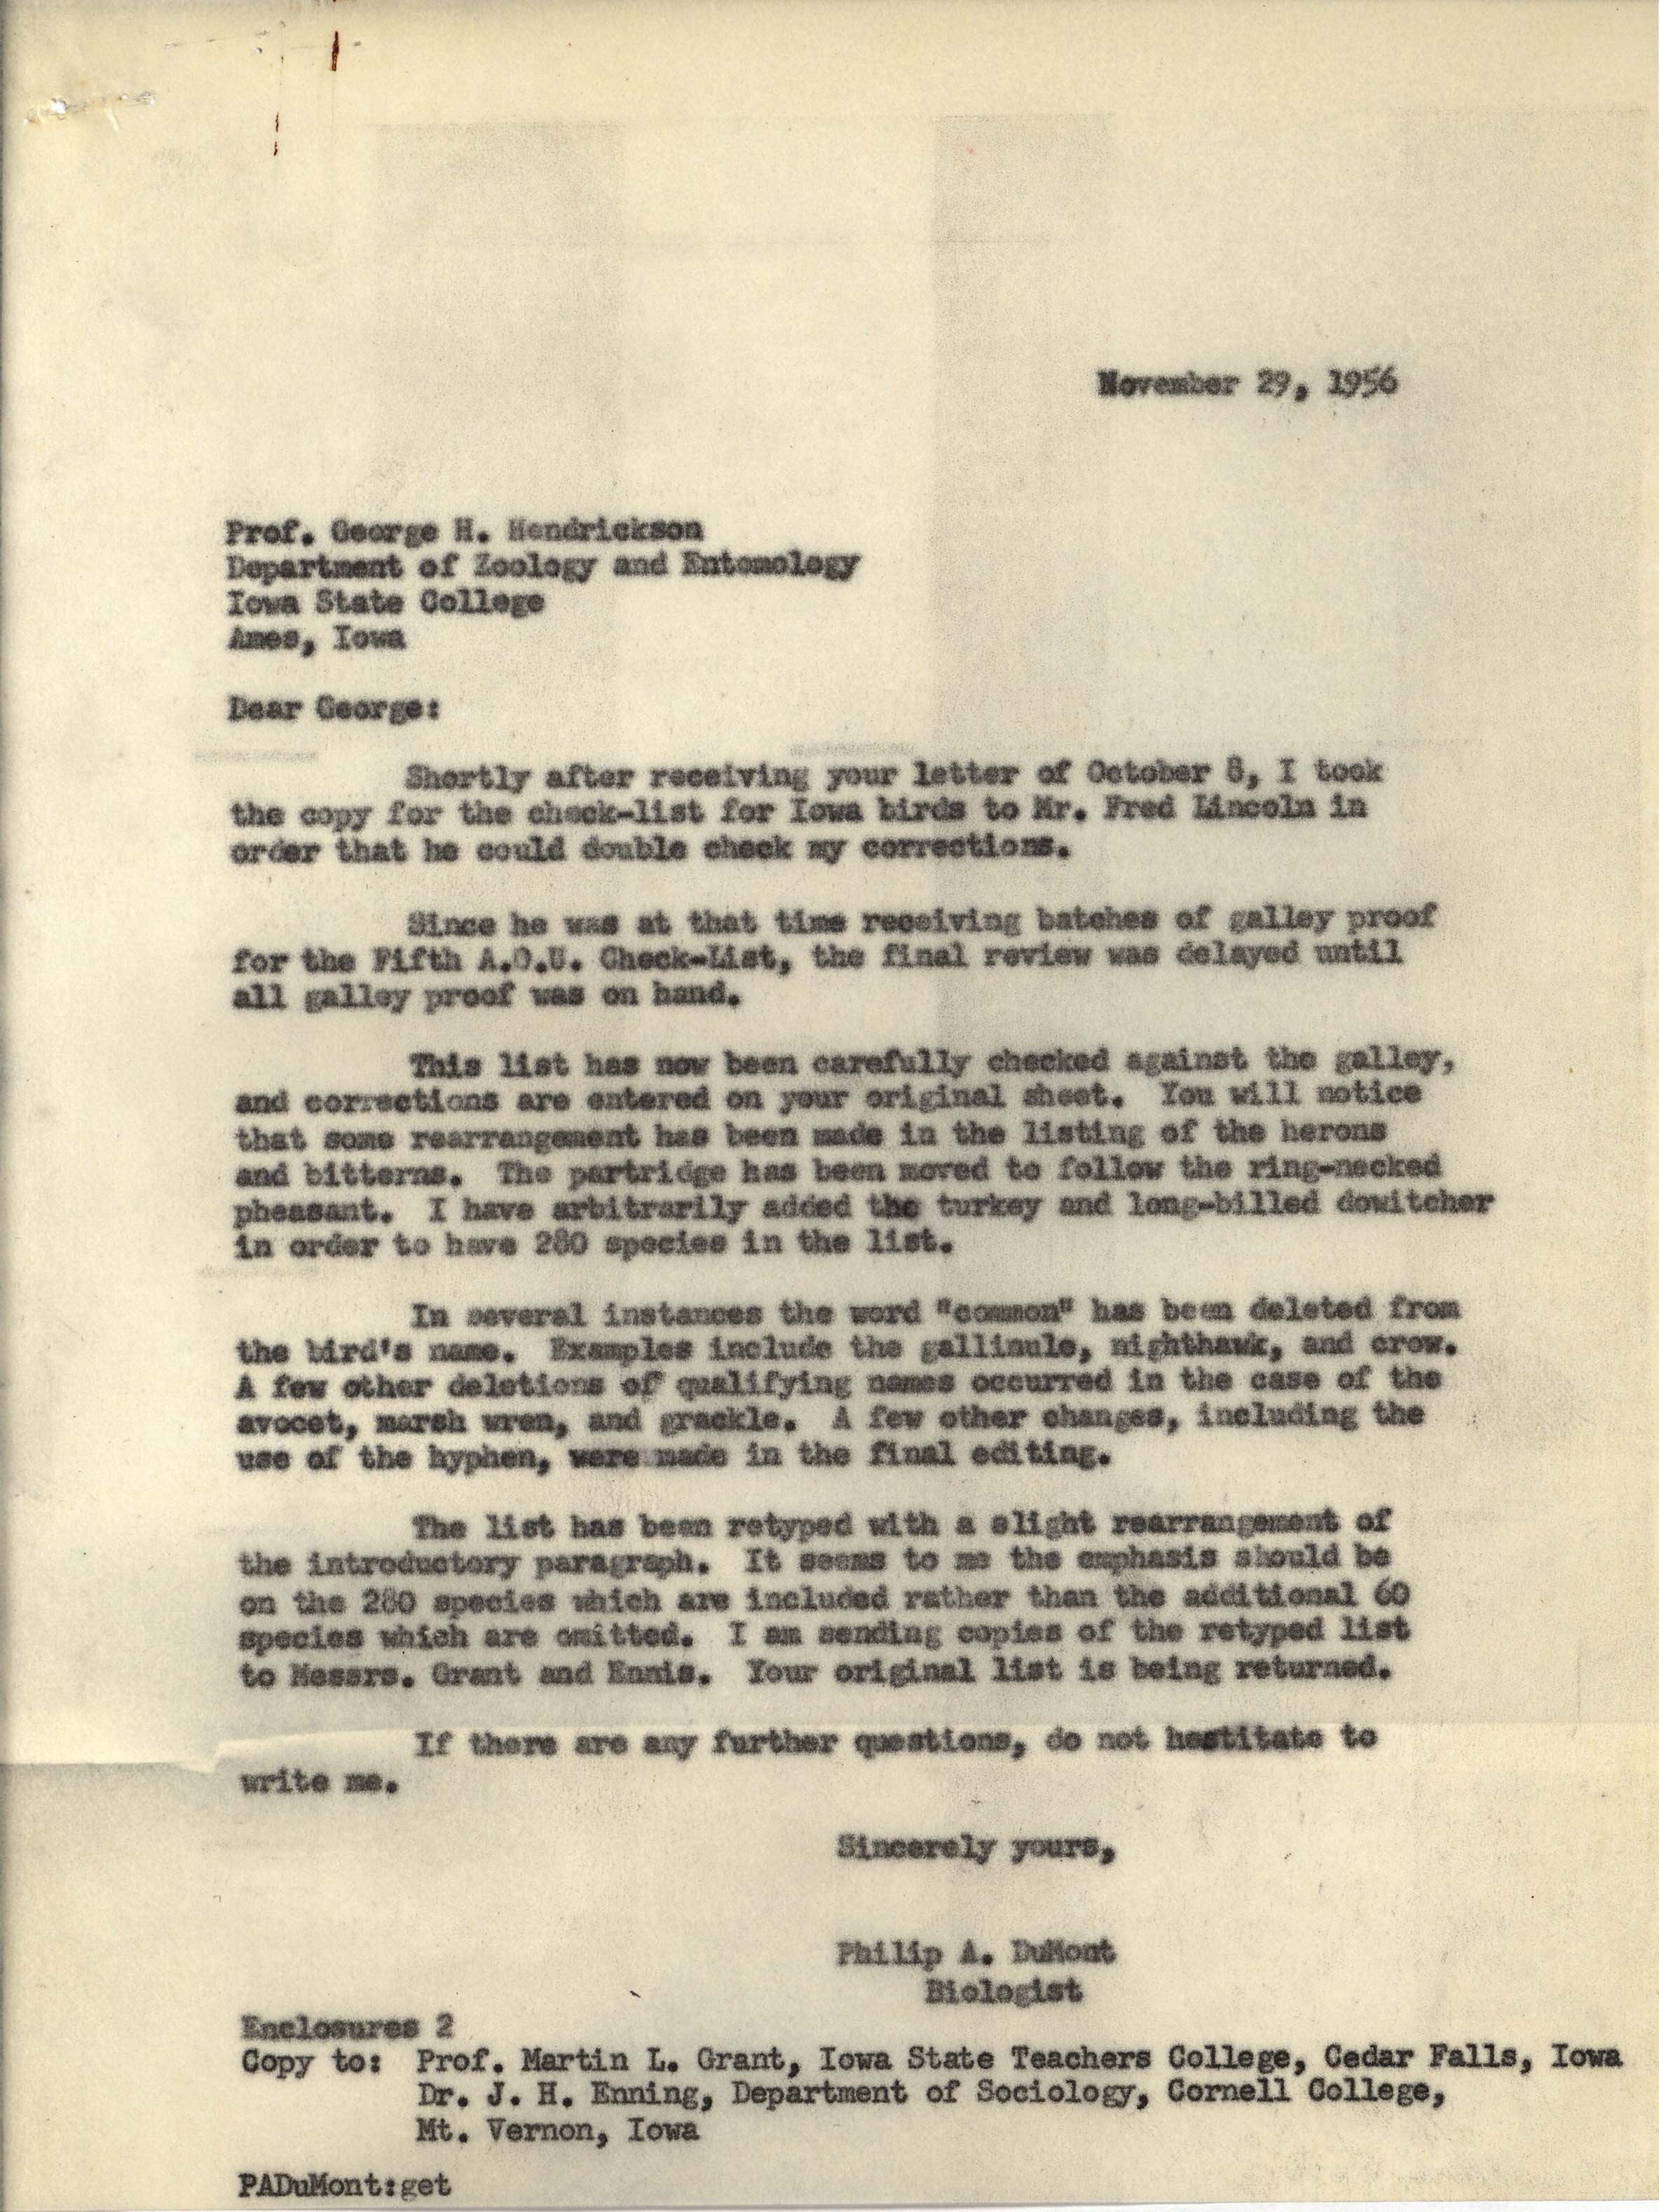 Philip DuMont letter to George Hendrickson regarding editorial changes to the revised checklist, November 29, 1956